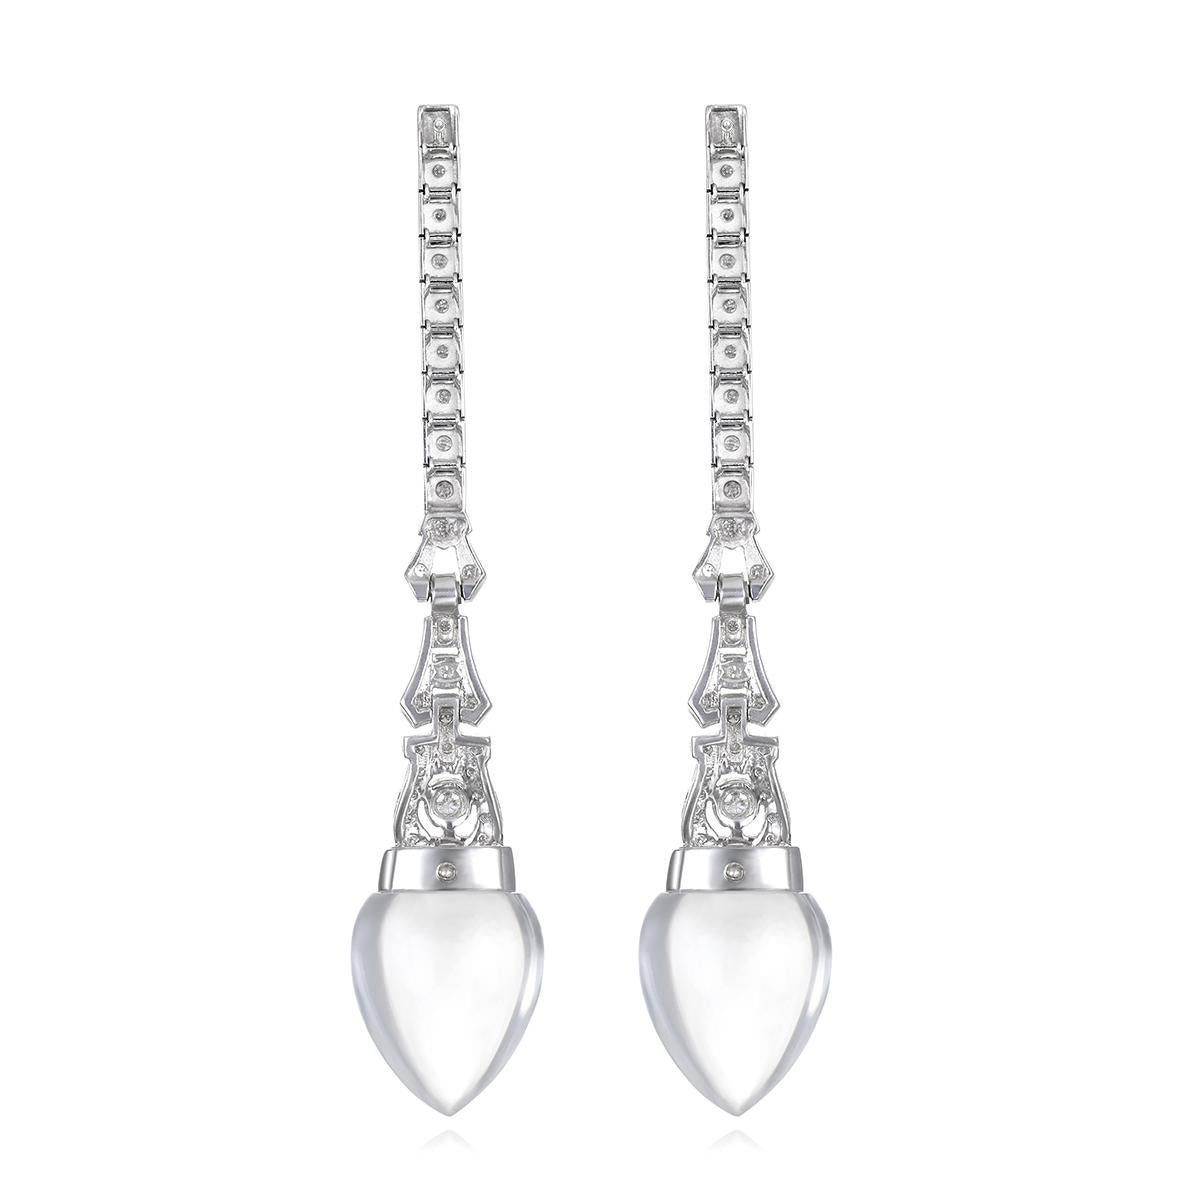 A Vintage watch in an Art Deco Style was reworked to make a pair of spectacular diamond line earrings. Set in 14 Karat White Gold, the diamond bracelet from a watch has been beautifully transformed with custom-cut Rock Crystal Quartz drops,